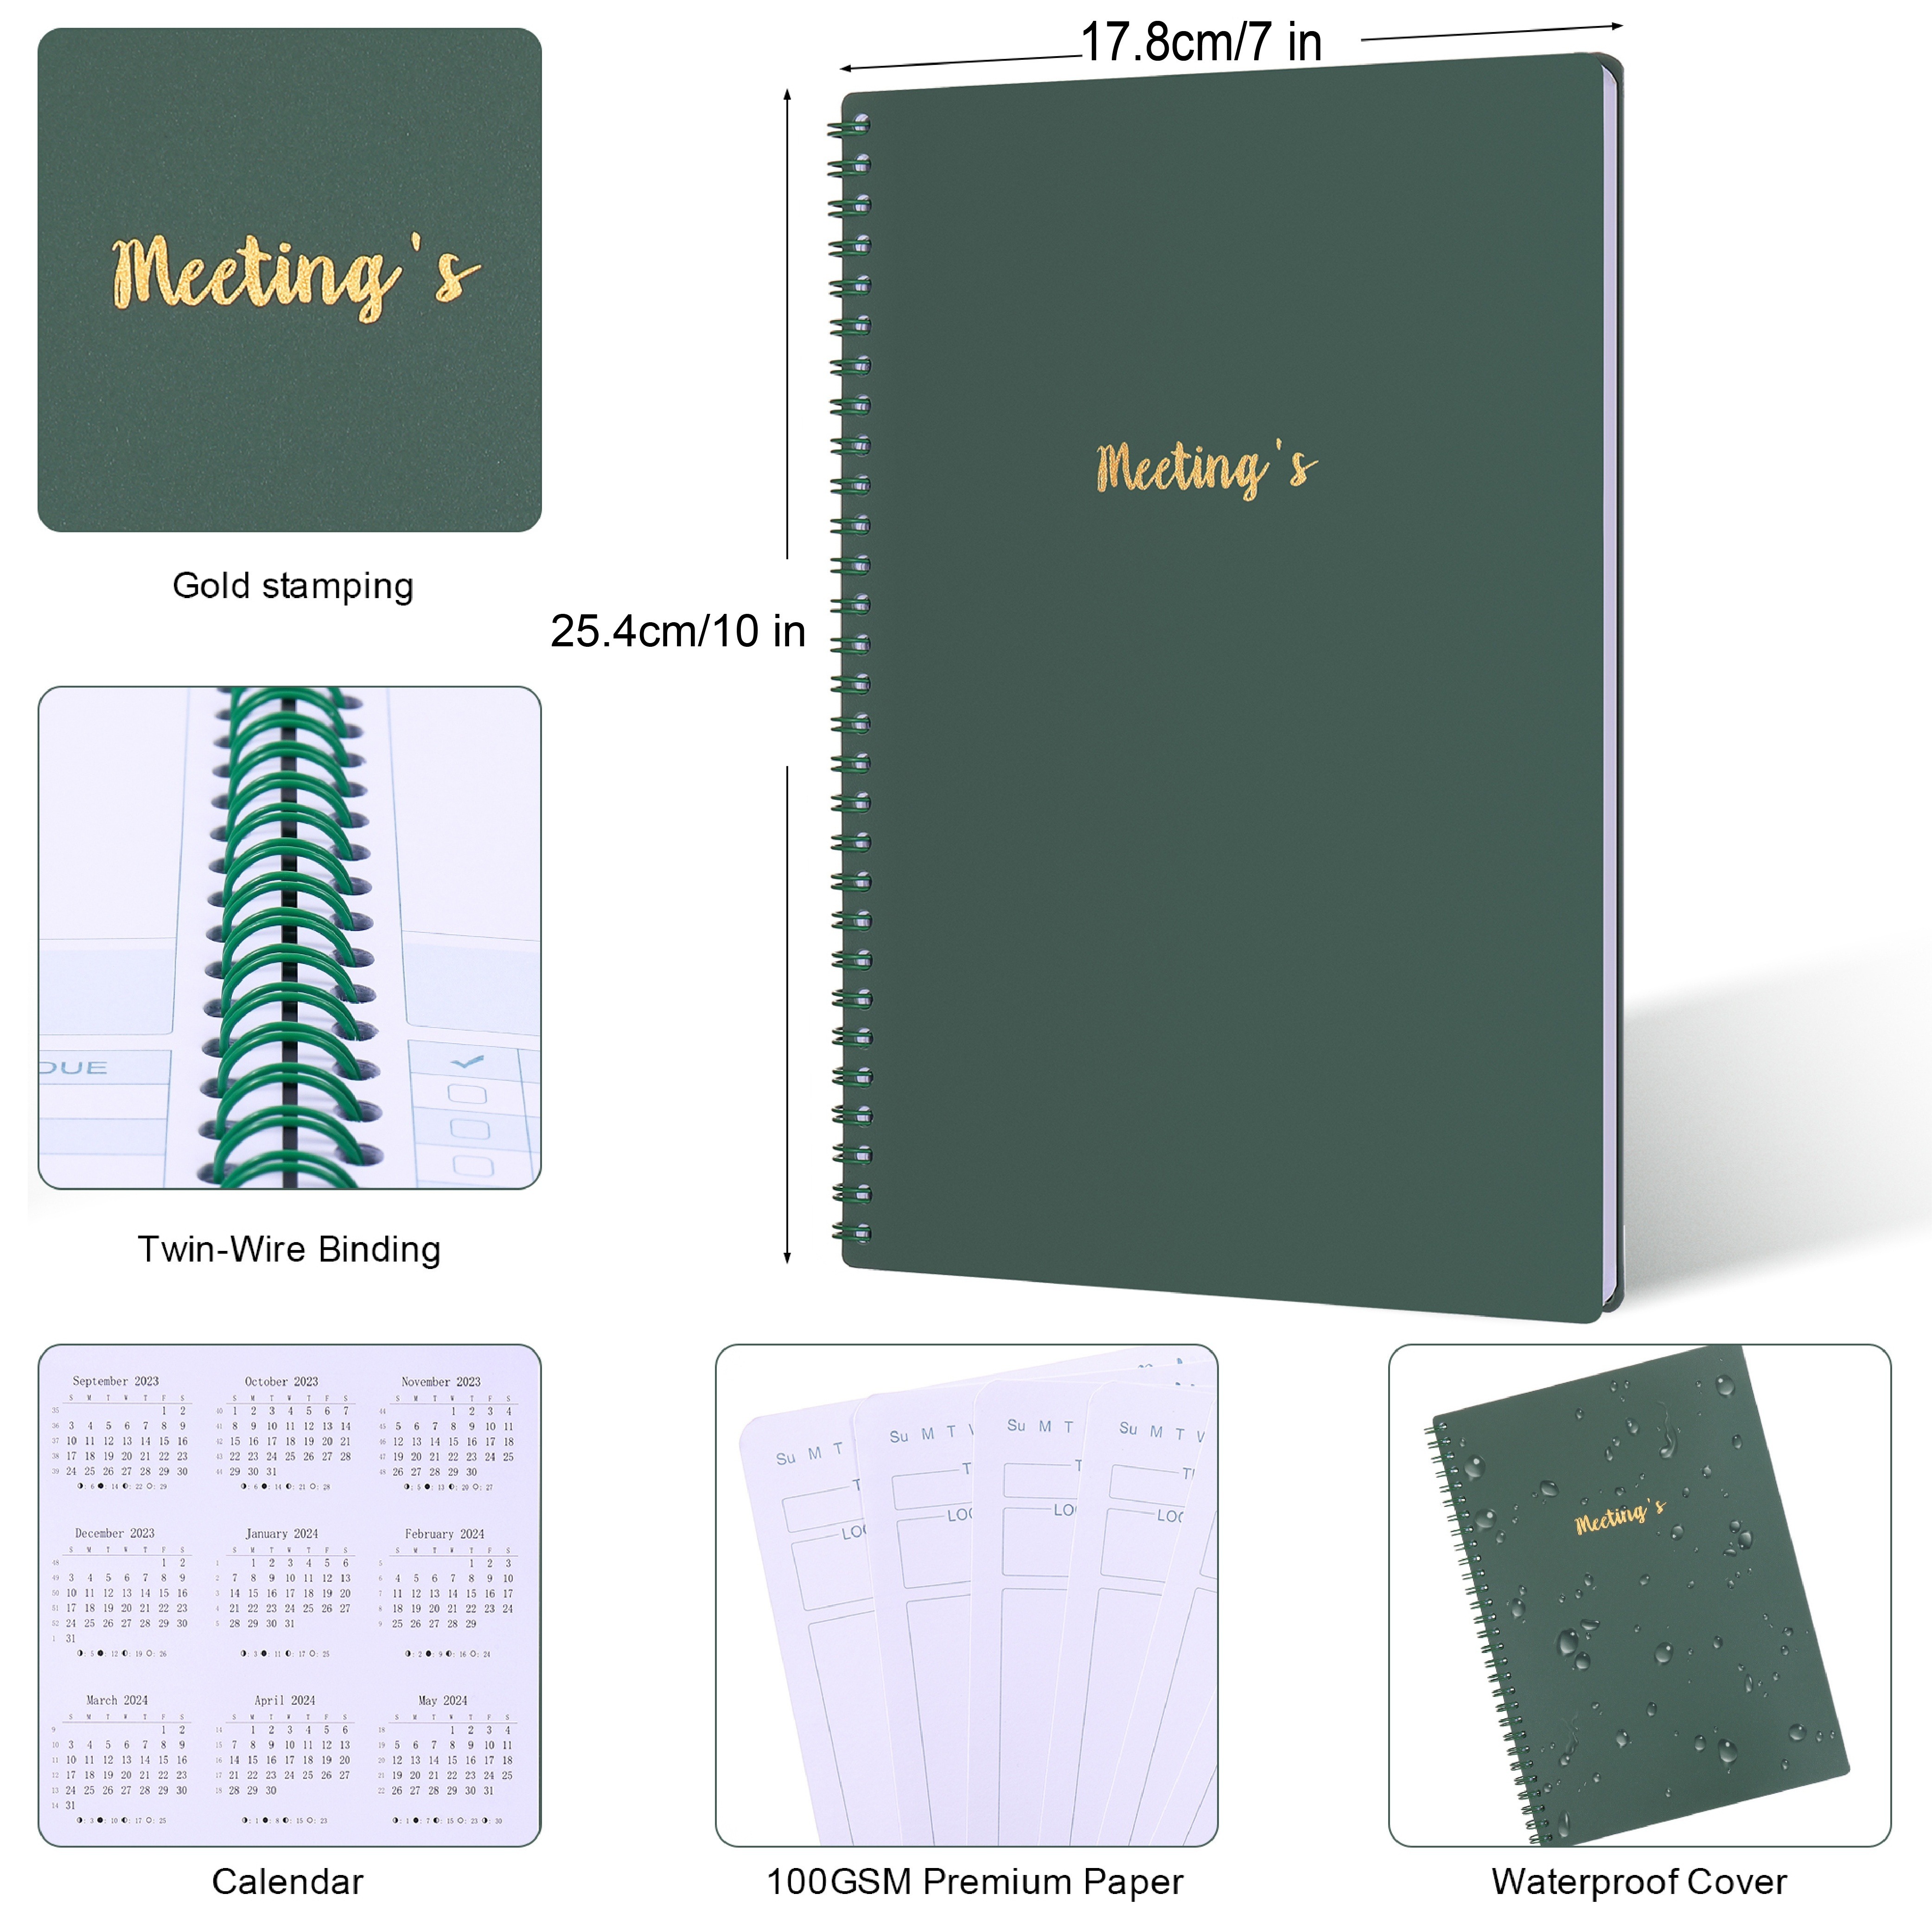  Simplified Meeting Notebook For Work Organization